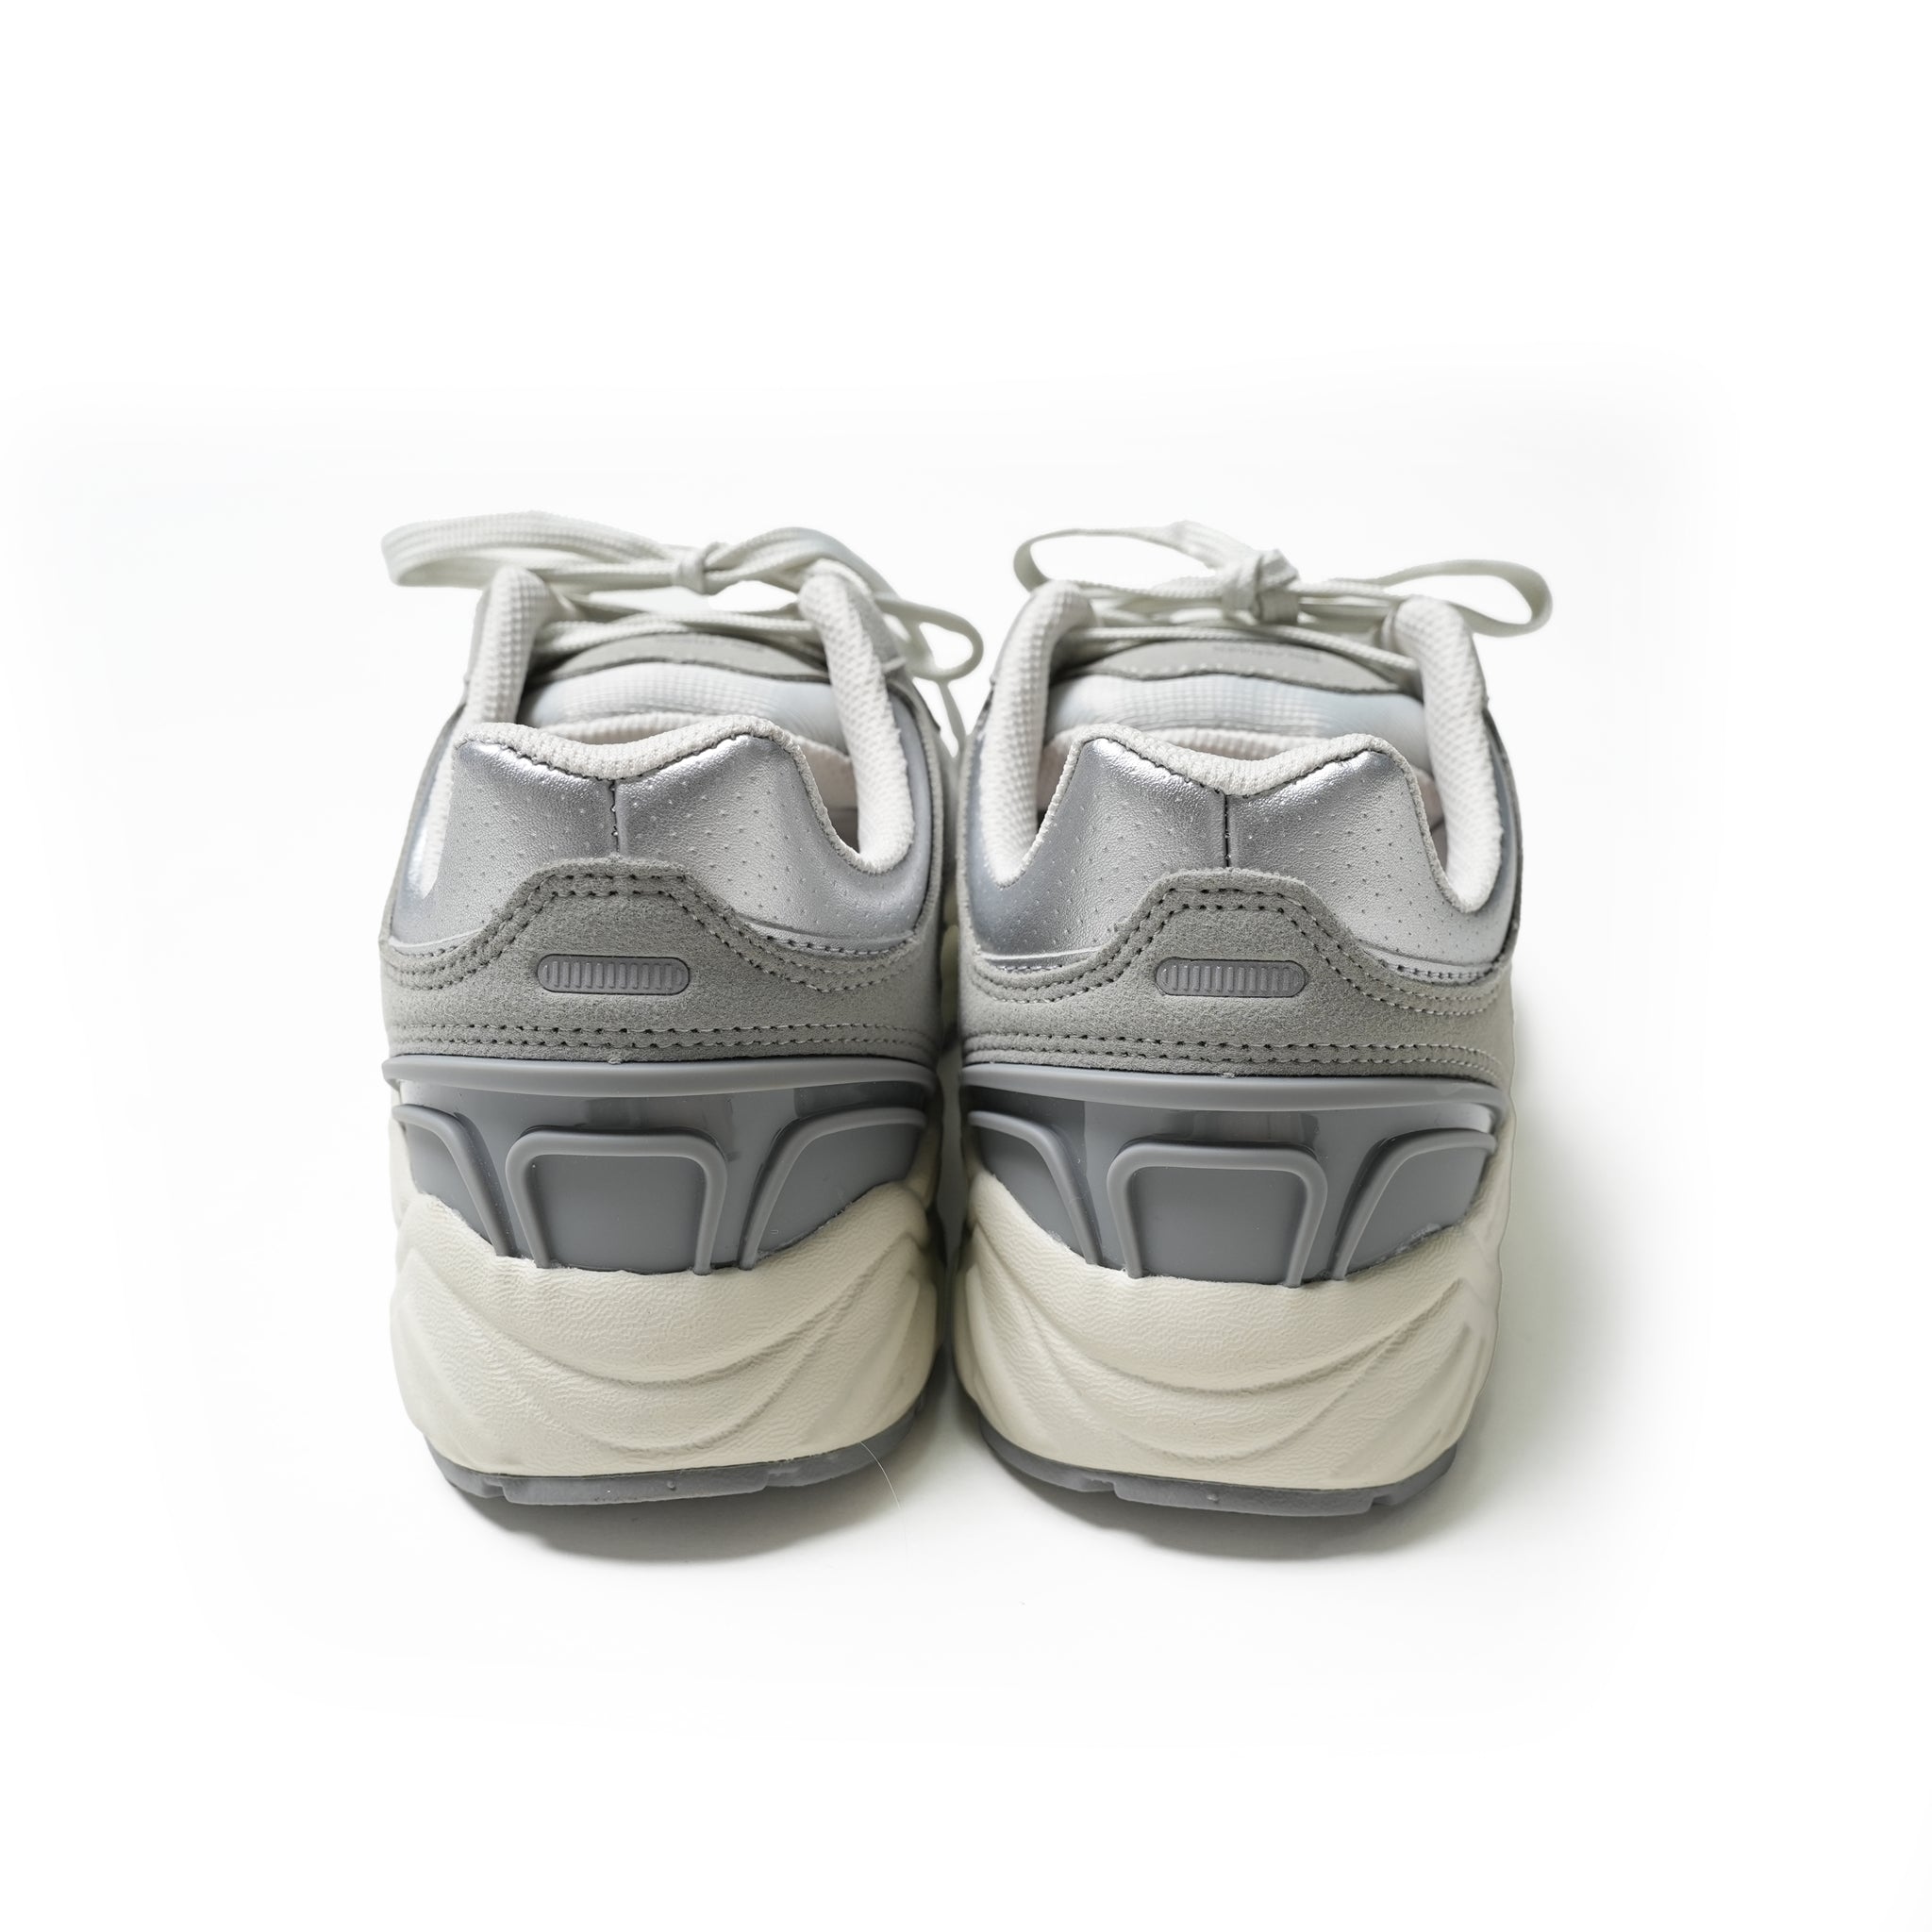 NO:ET002 | Name:STUDEN スチューデン | Color:Silver Gray【810S_エイトテンス】【MOONSTAR_ムーンスター】